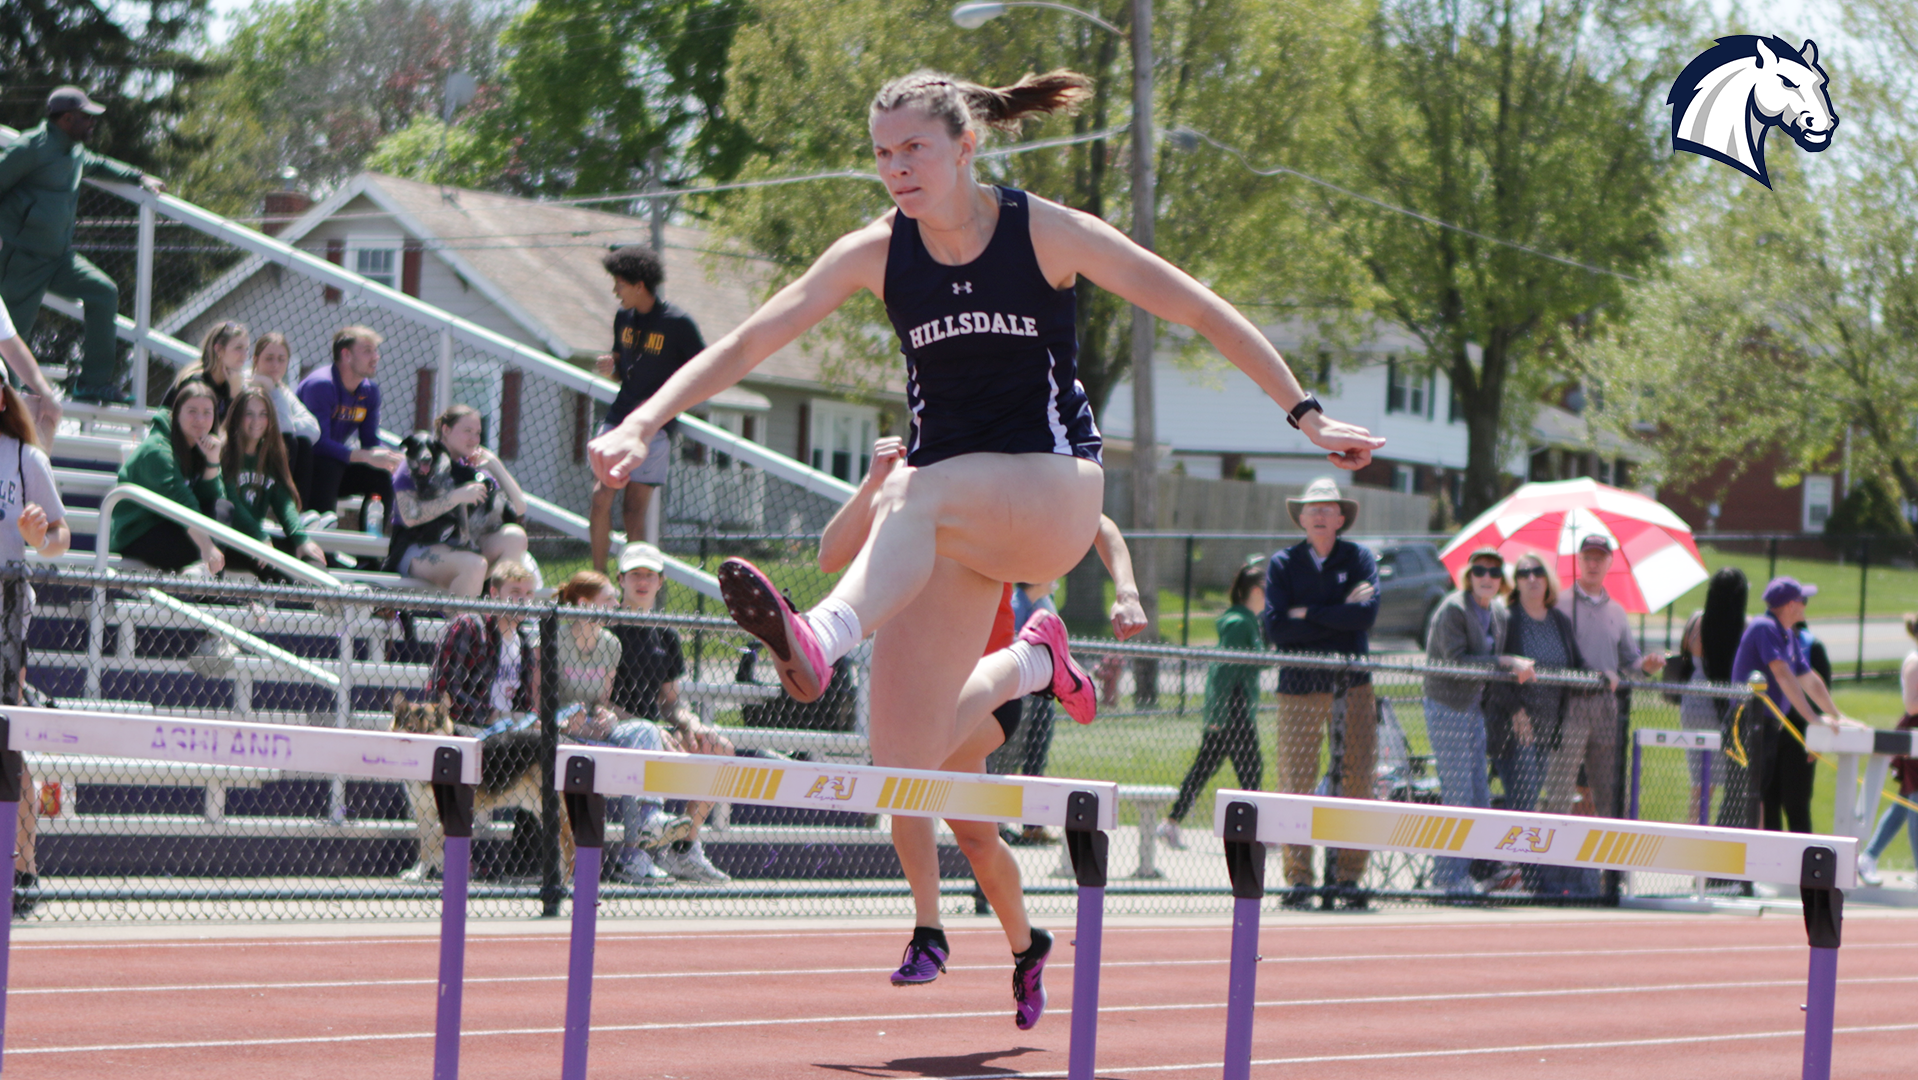 Record-setting performance by Ermakov highlights Chargers' runner-up finish at G-MAC Outdoor Championships